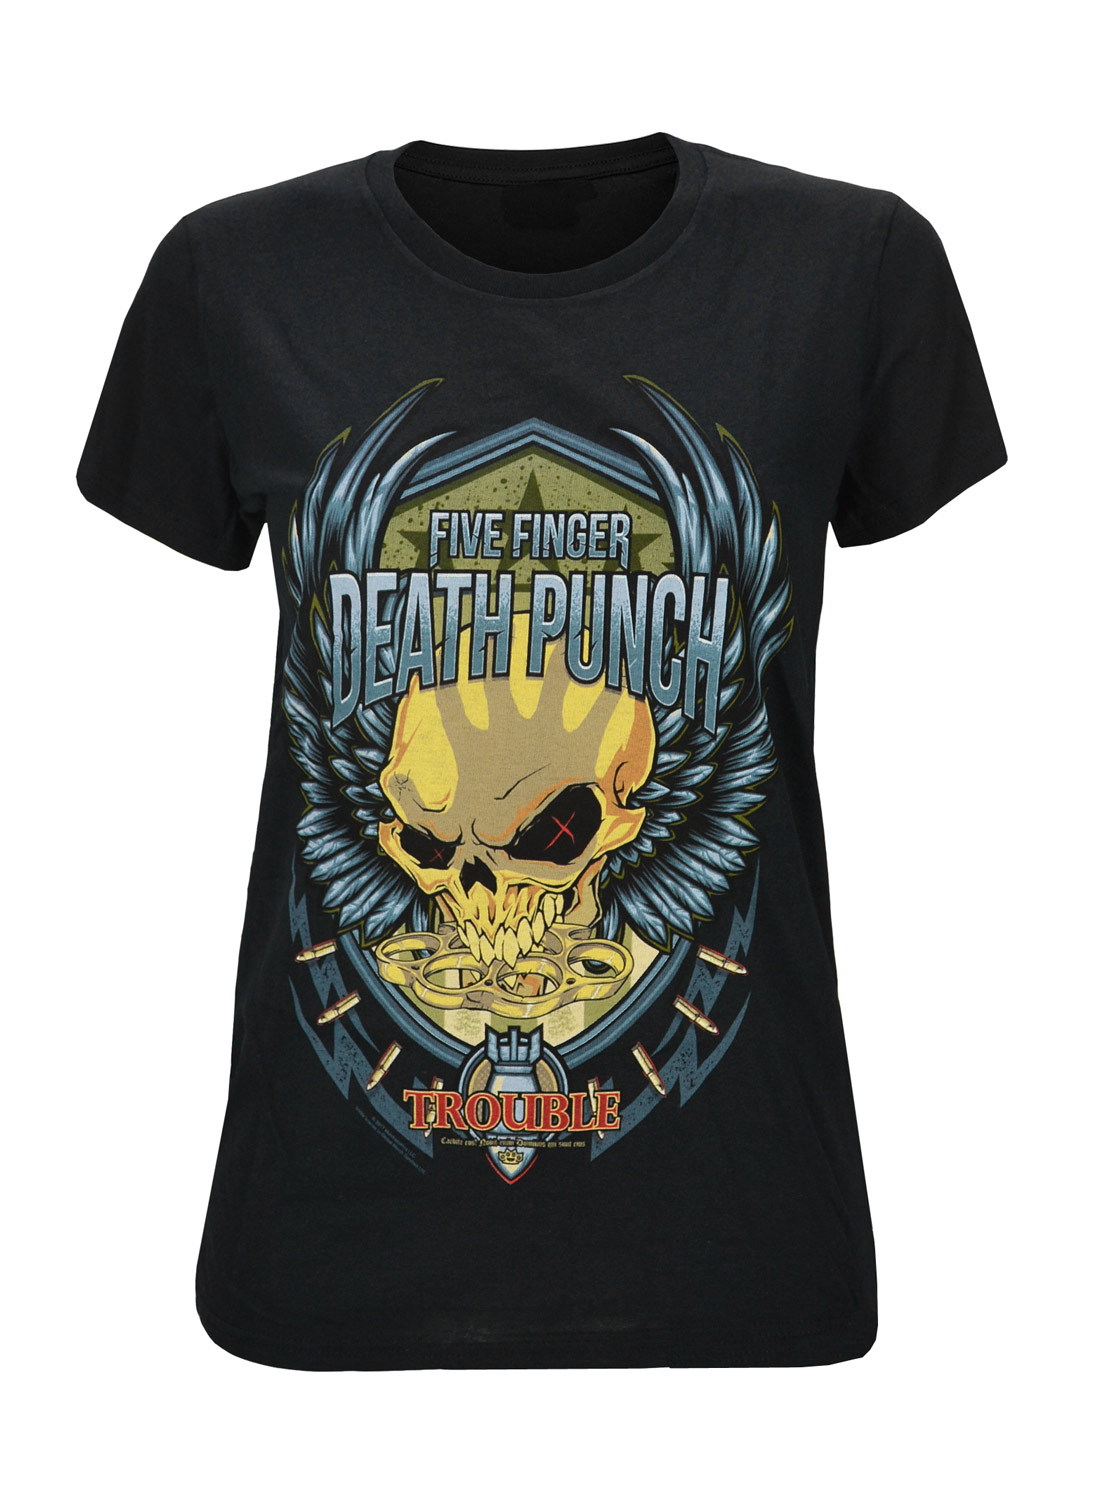 Five Finger Death Punch Trouble Girly T